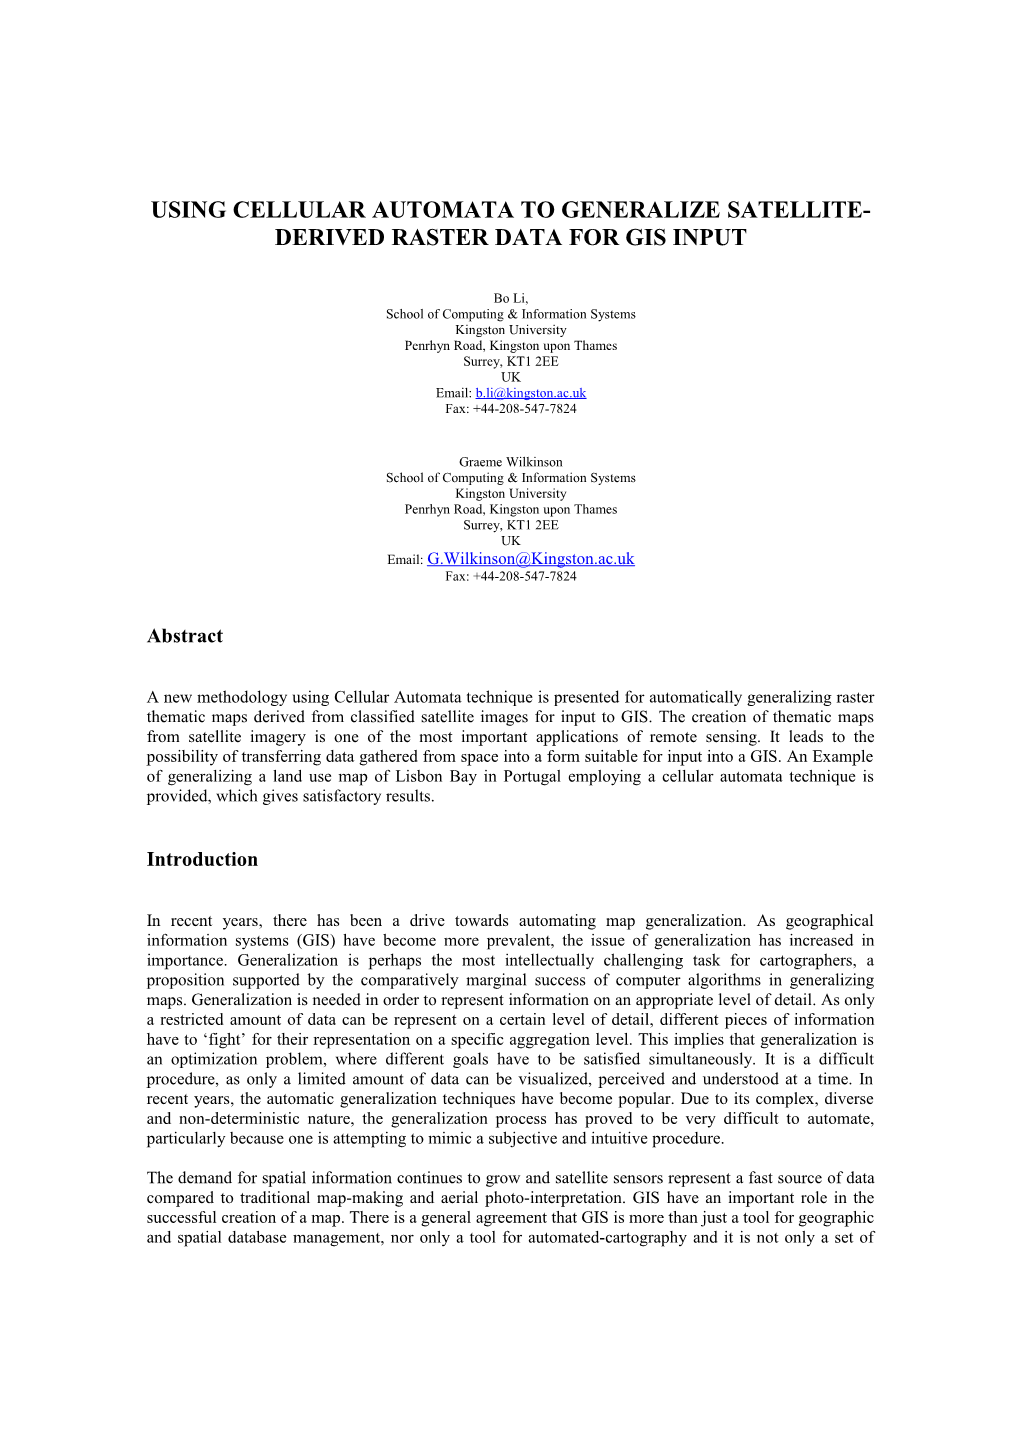 A Cellular Automata Model of Generalizing Satellite-Derived Raster Maps for GIS Input